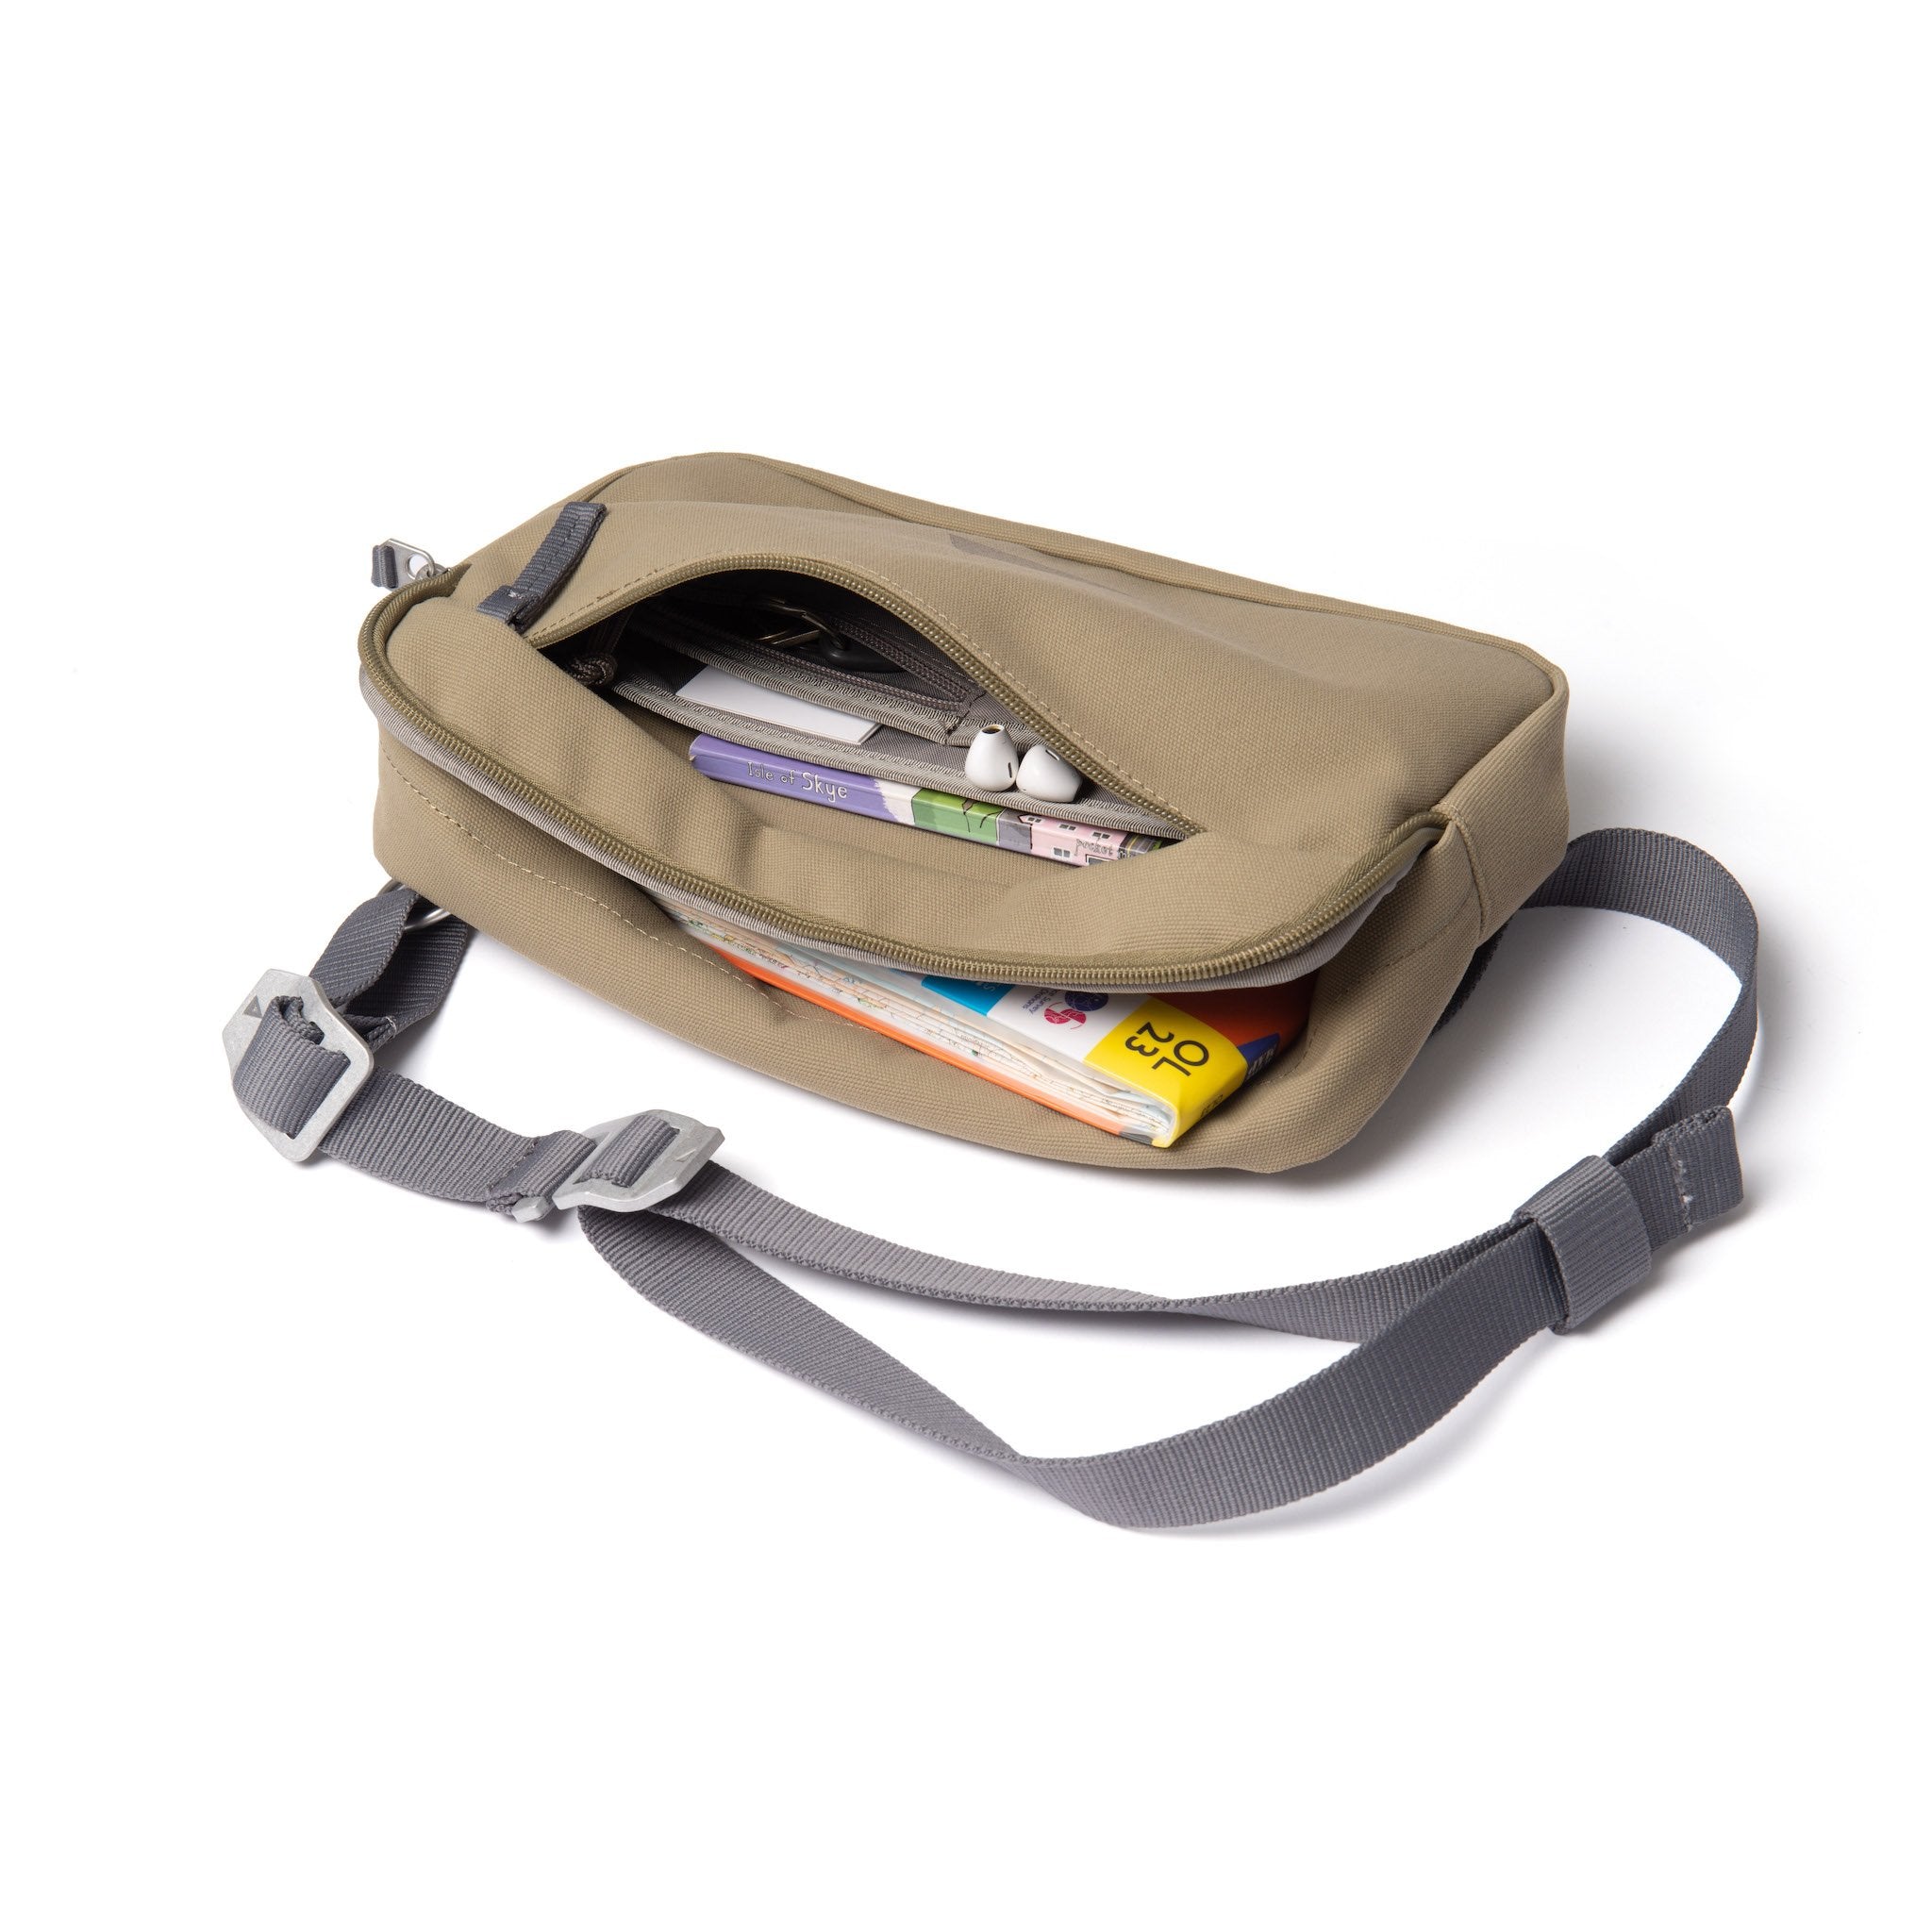 Khaki shoulder bag with front zip open showing map and guidebooks.